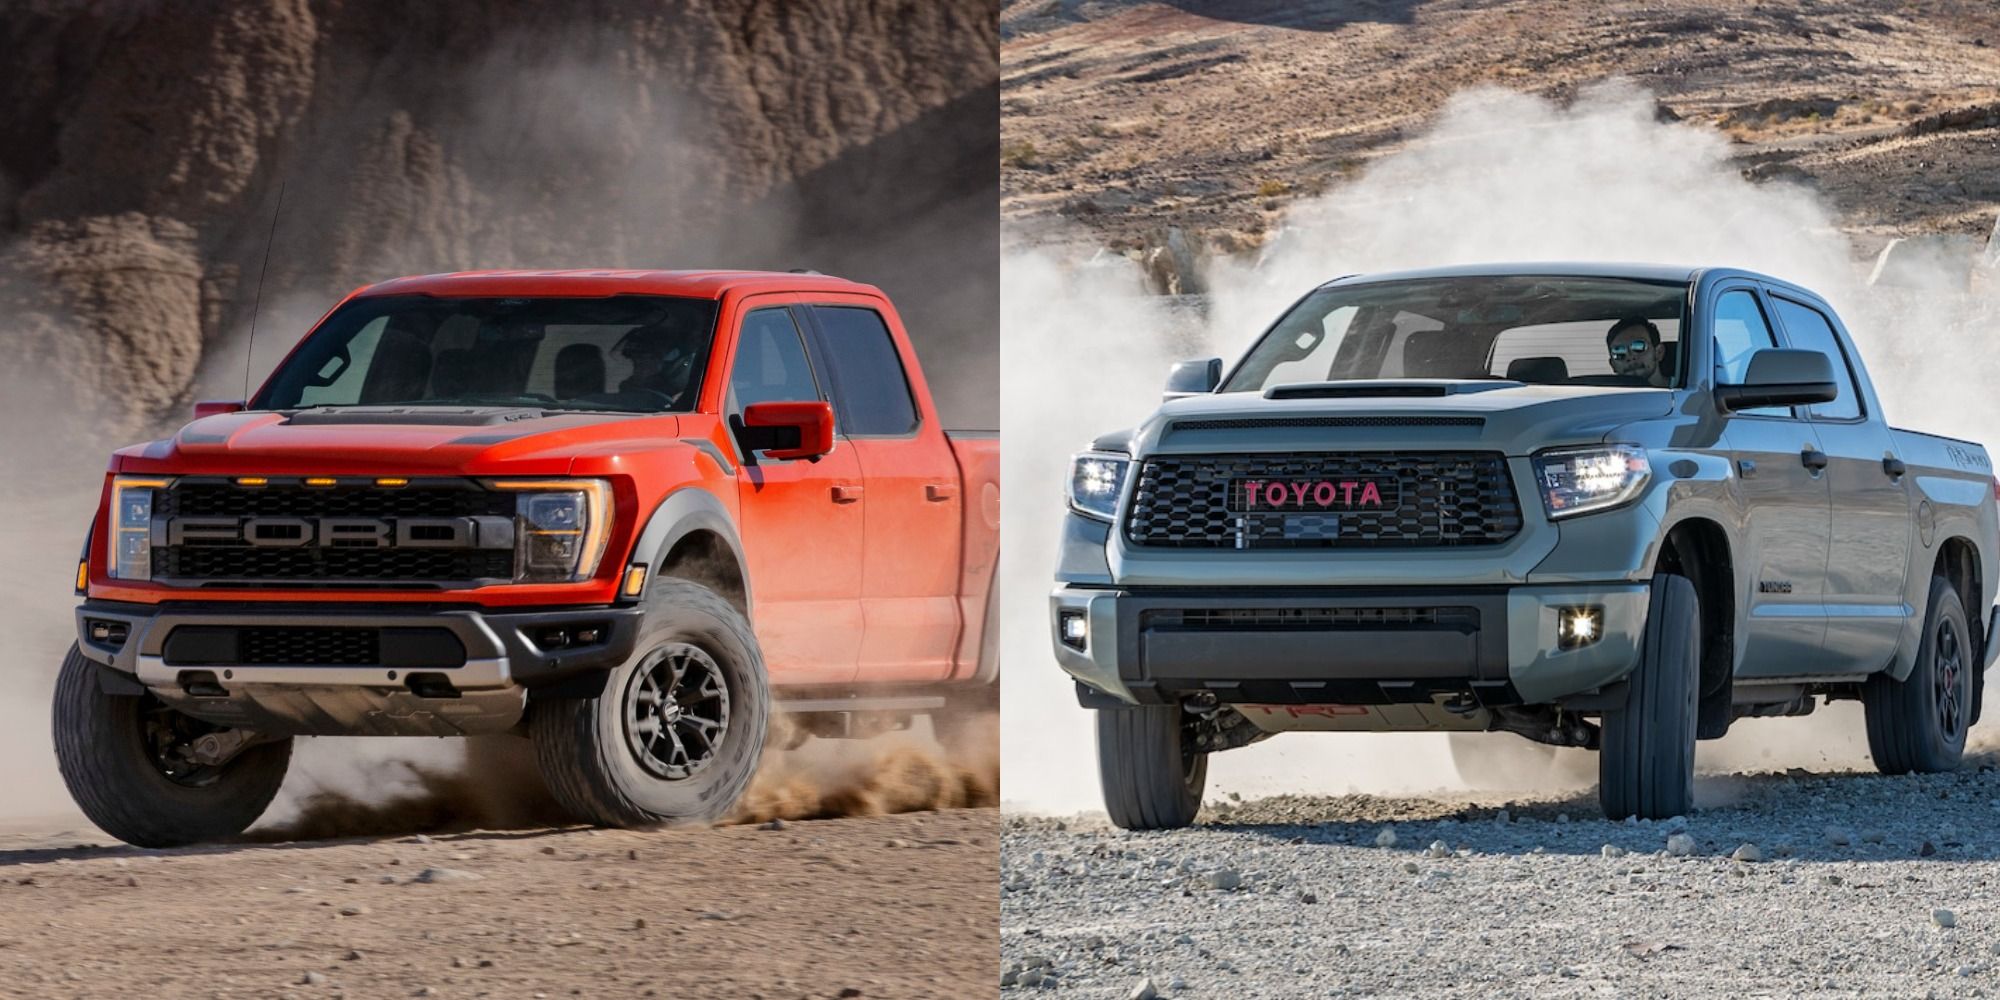 2021 Toyota Tundra TRD PRO Vs Ford F-150 Raptor: Which Performance